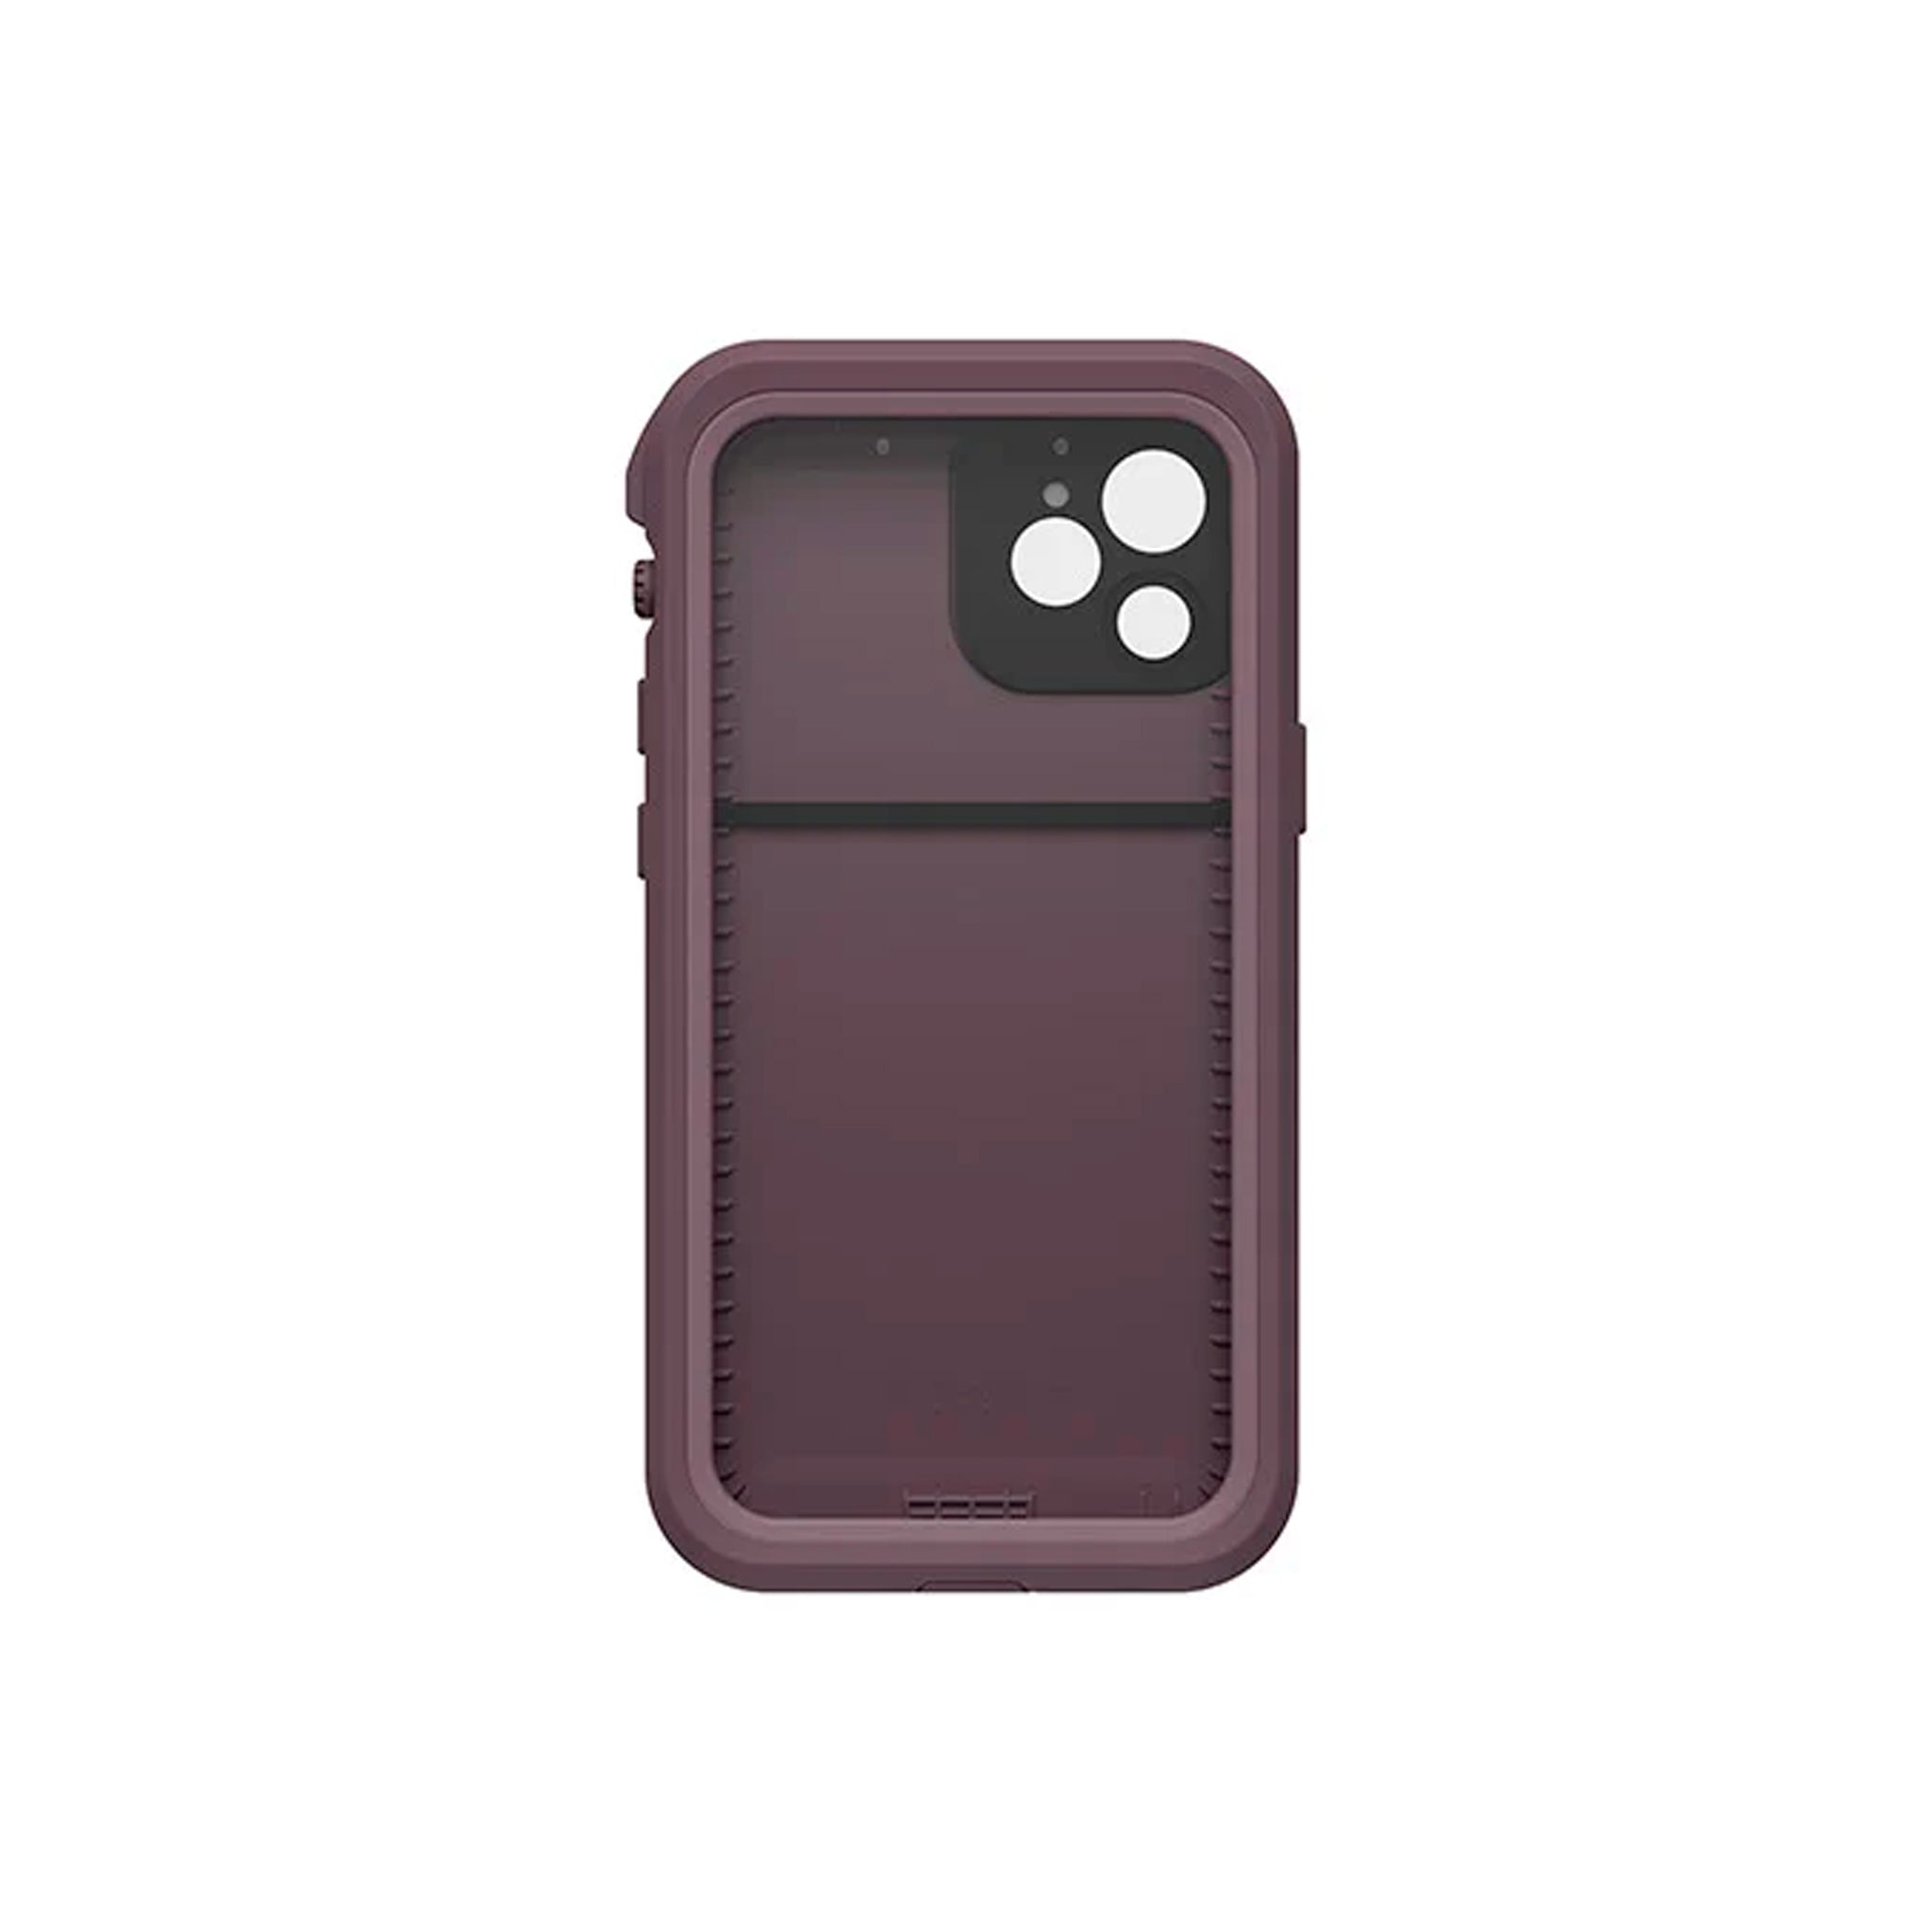 LifeProof - Fre for iPhone 12 mini - Ocean Violet